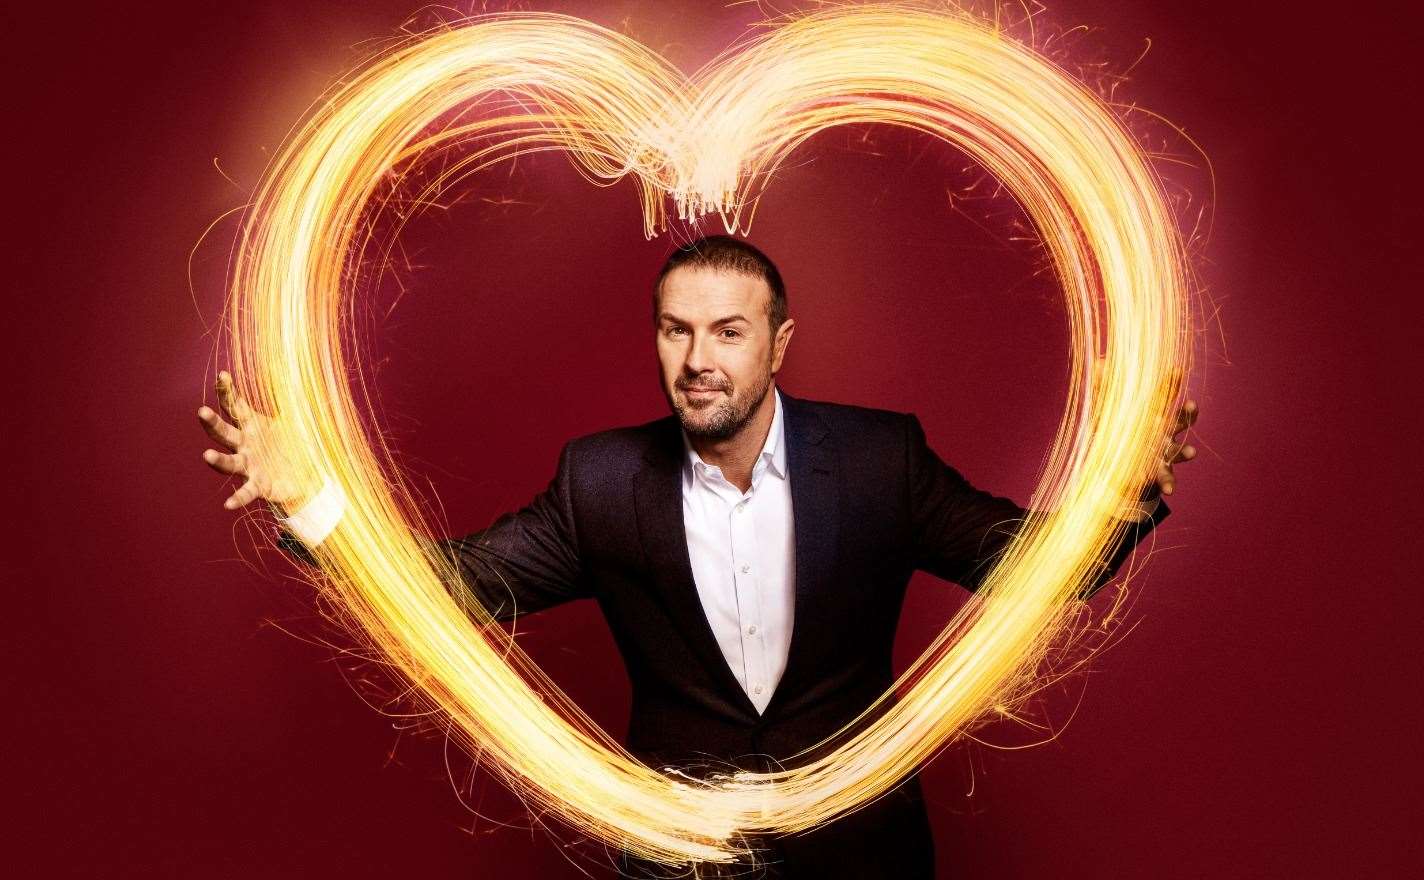 Take Me Out host Paddy McGuinness